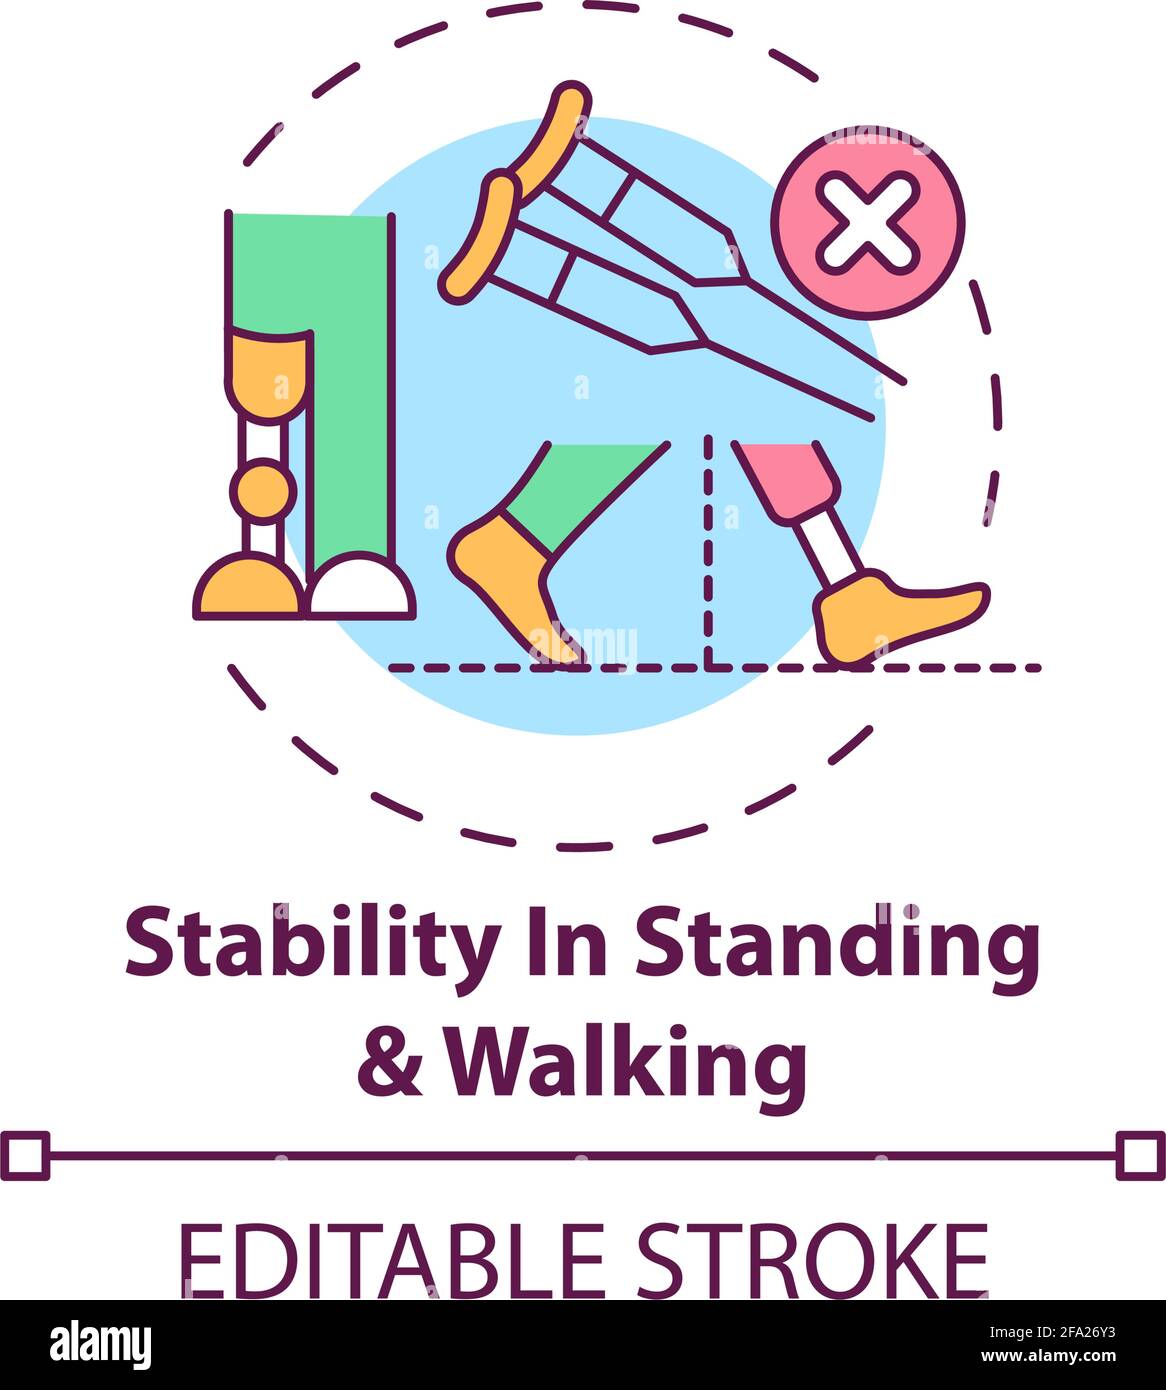 Stability in standing and walking concept icon Stock Vector